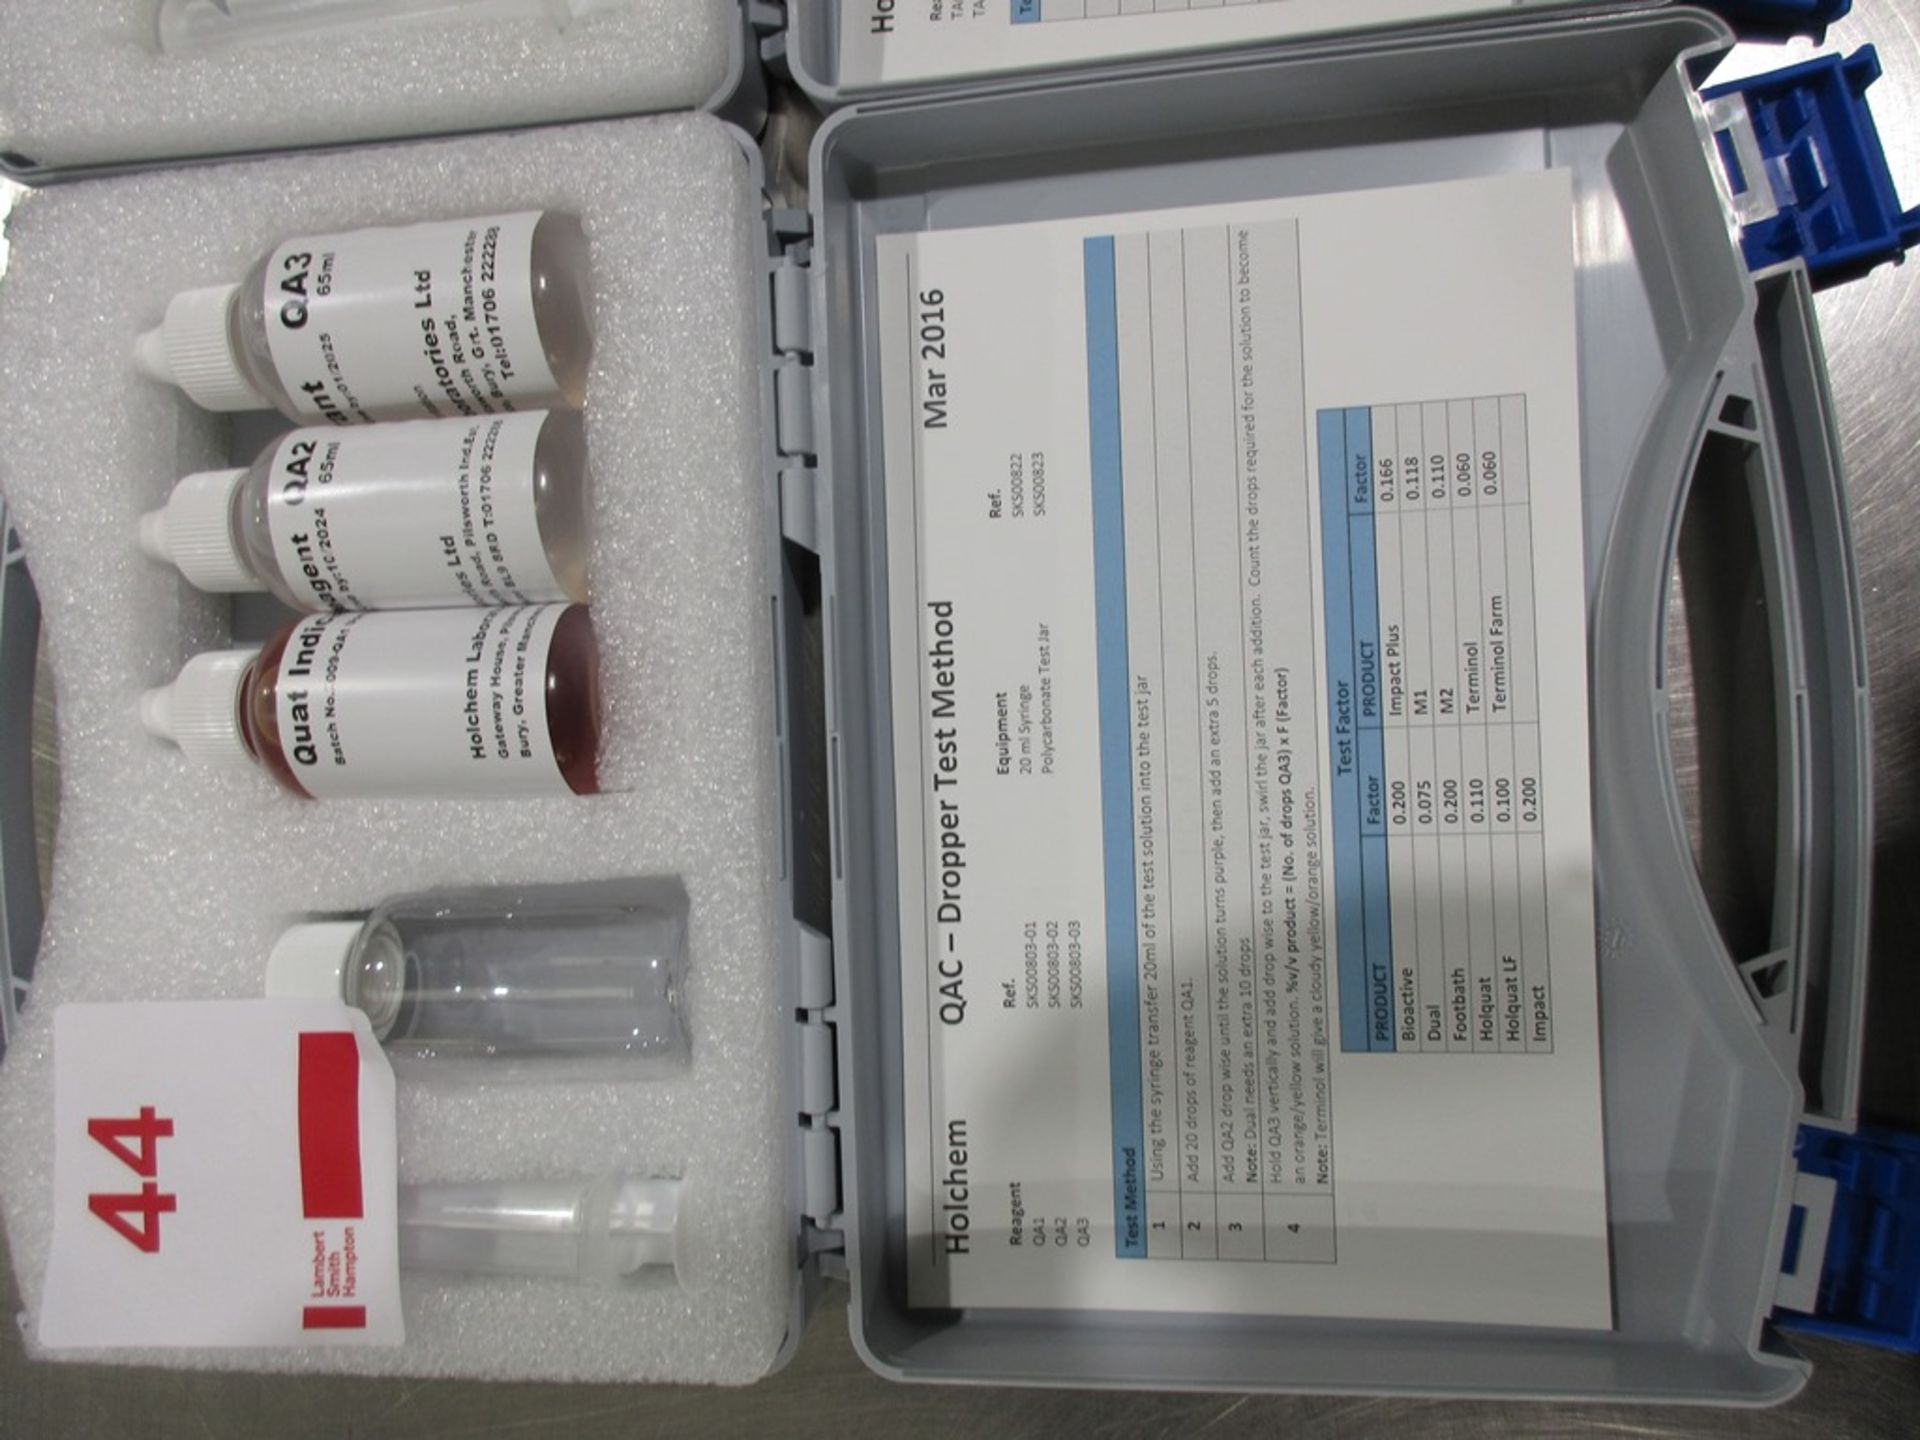 Holchem QAC, Triamine, Anionic and Alkaline dropper test method sets and Conmark C12 digital - Image 2 of 6